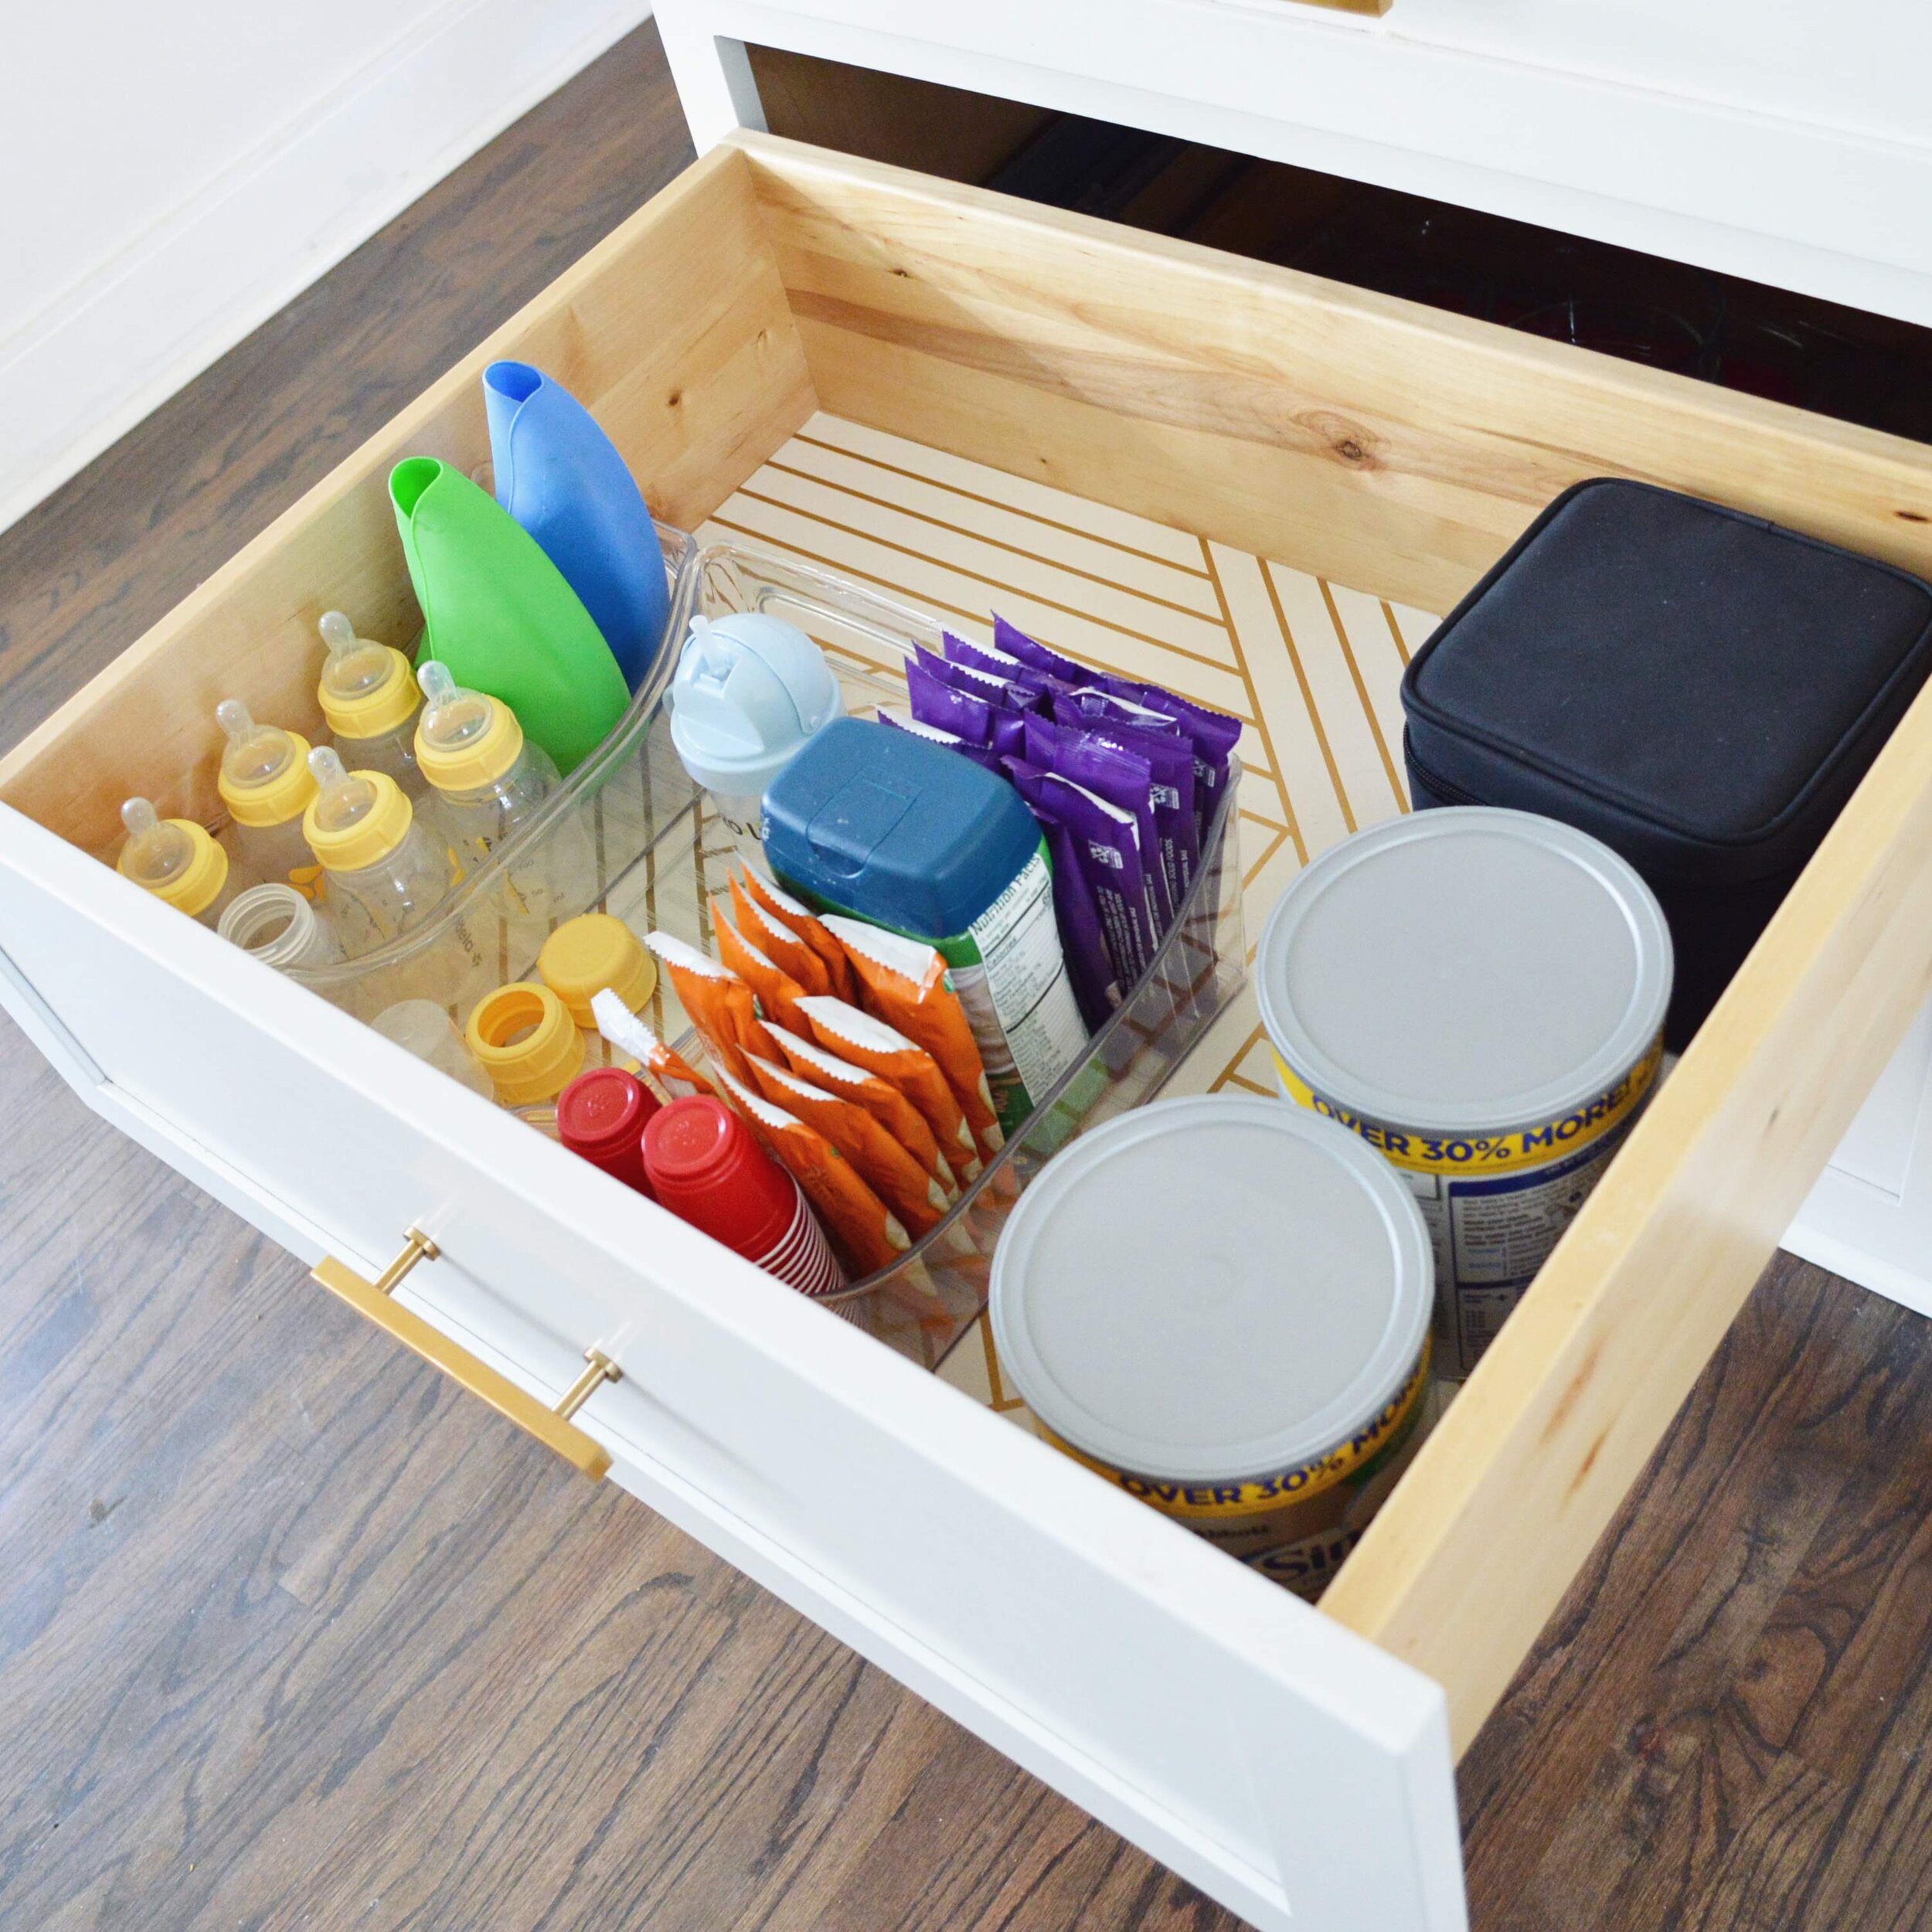 The Everything Deep Drawer Organizers